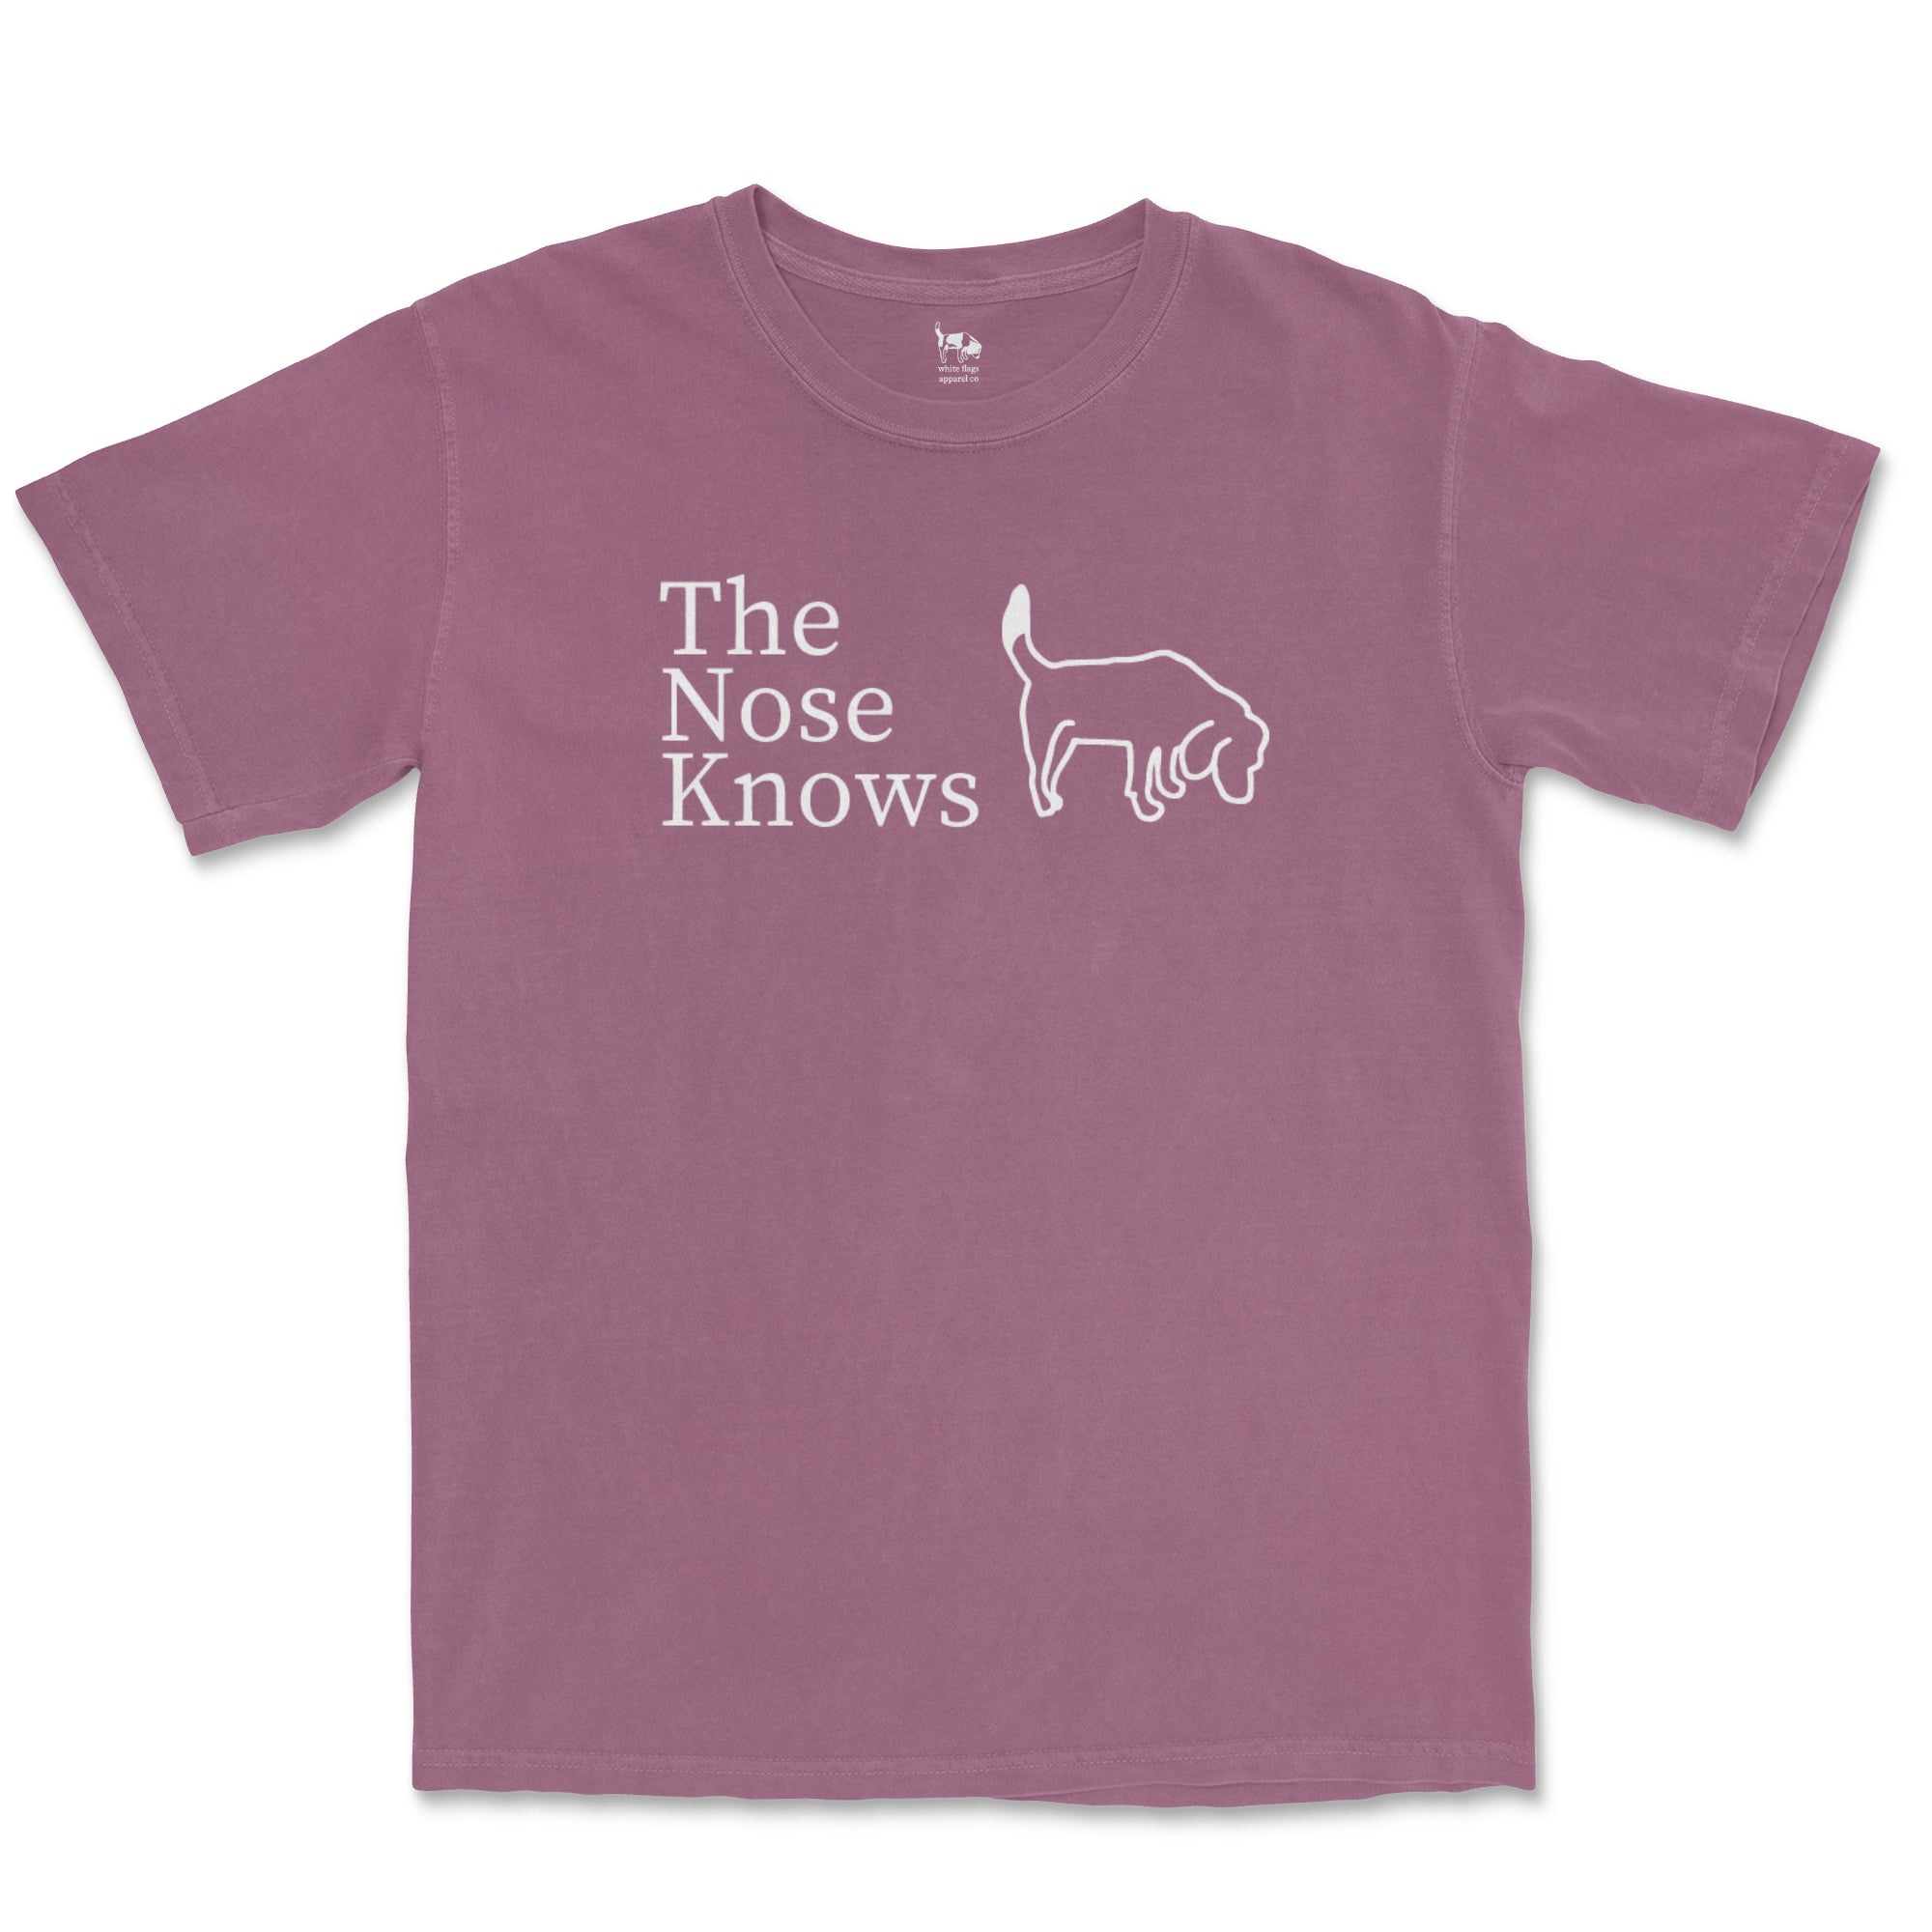 Rescue Tee - The Nose Knows - Short Sleeve